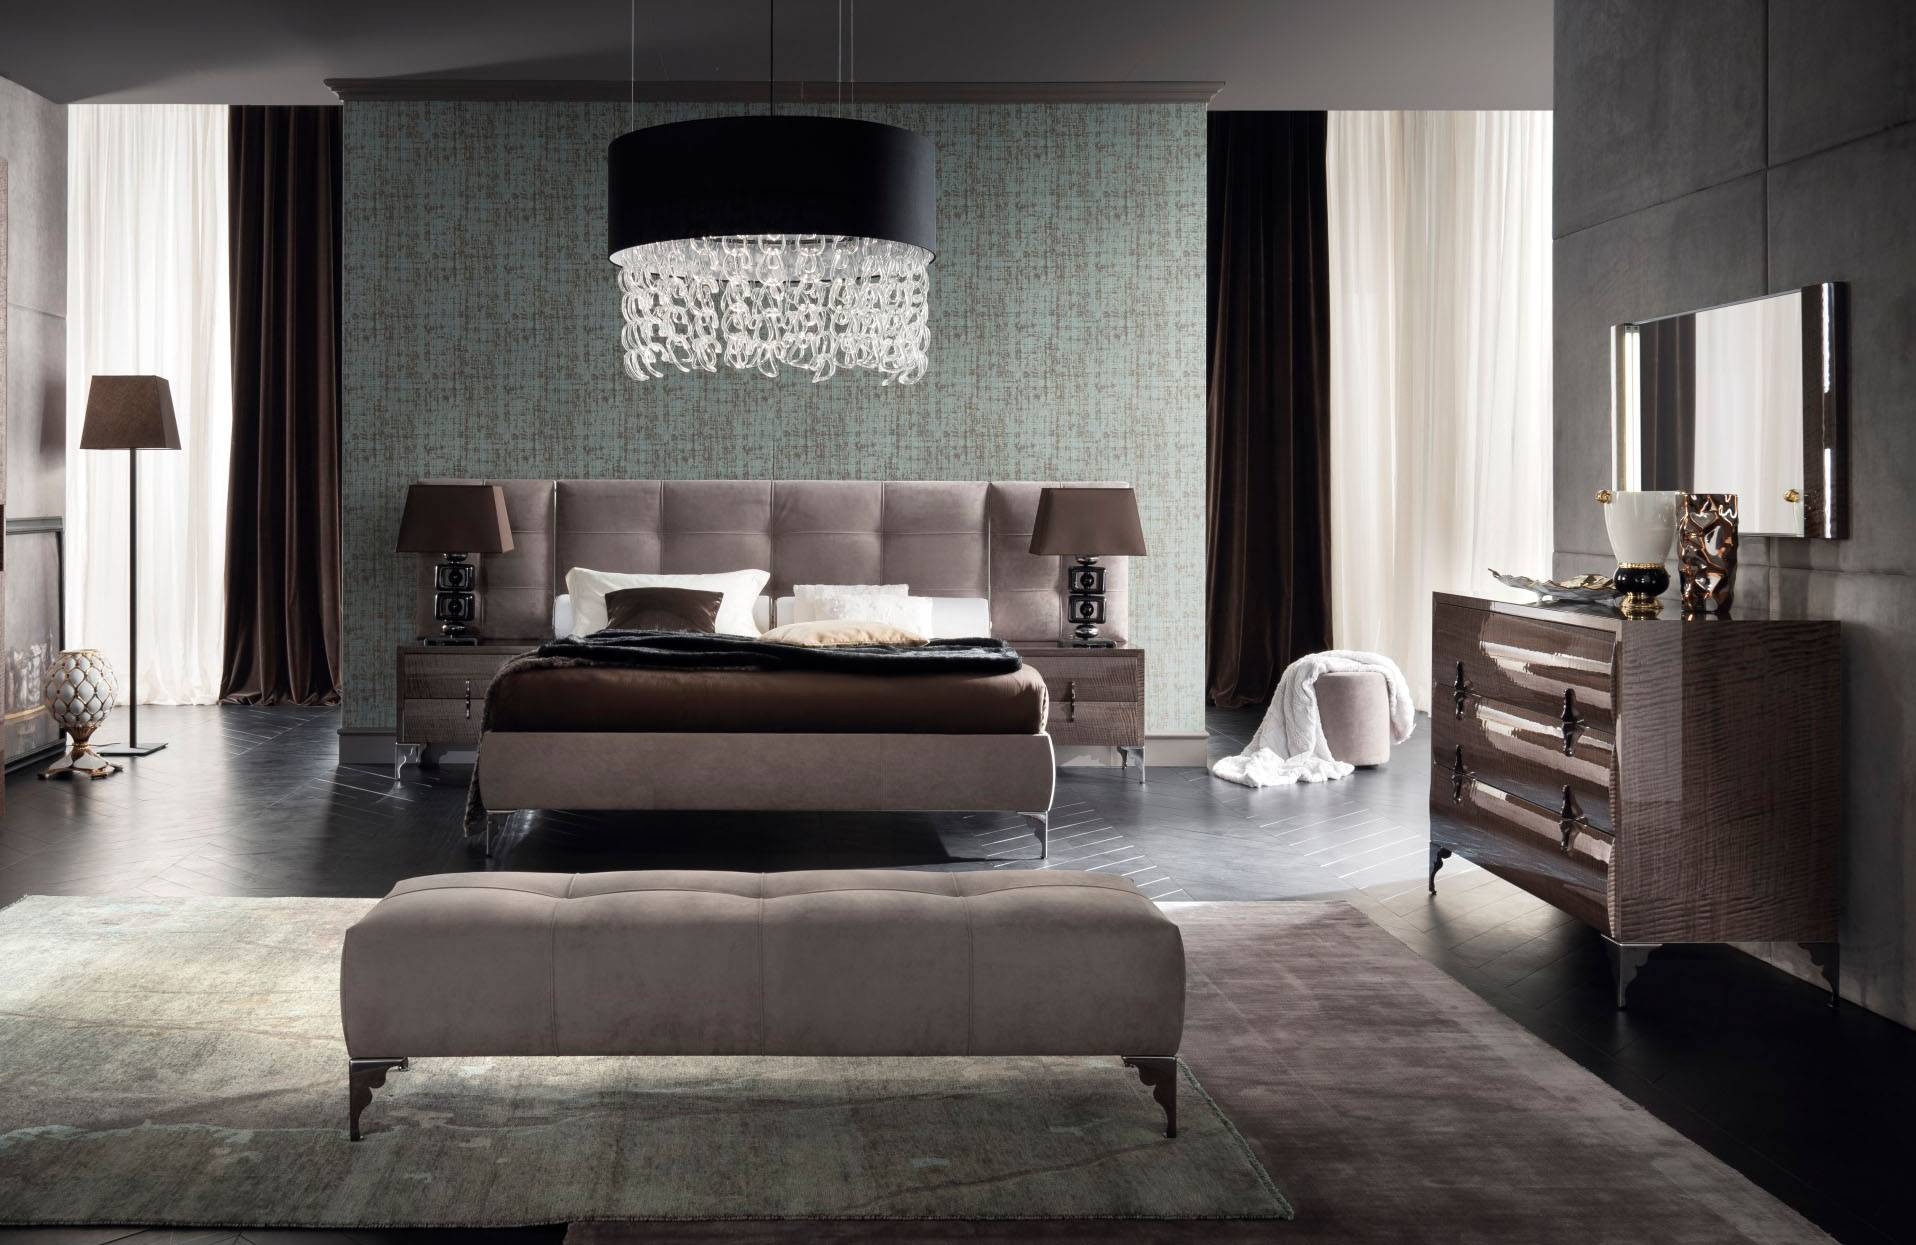 Luxury Master Bedroom Furniture
 Made in Italy Leather Contemporary Master Bedroom Designs